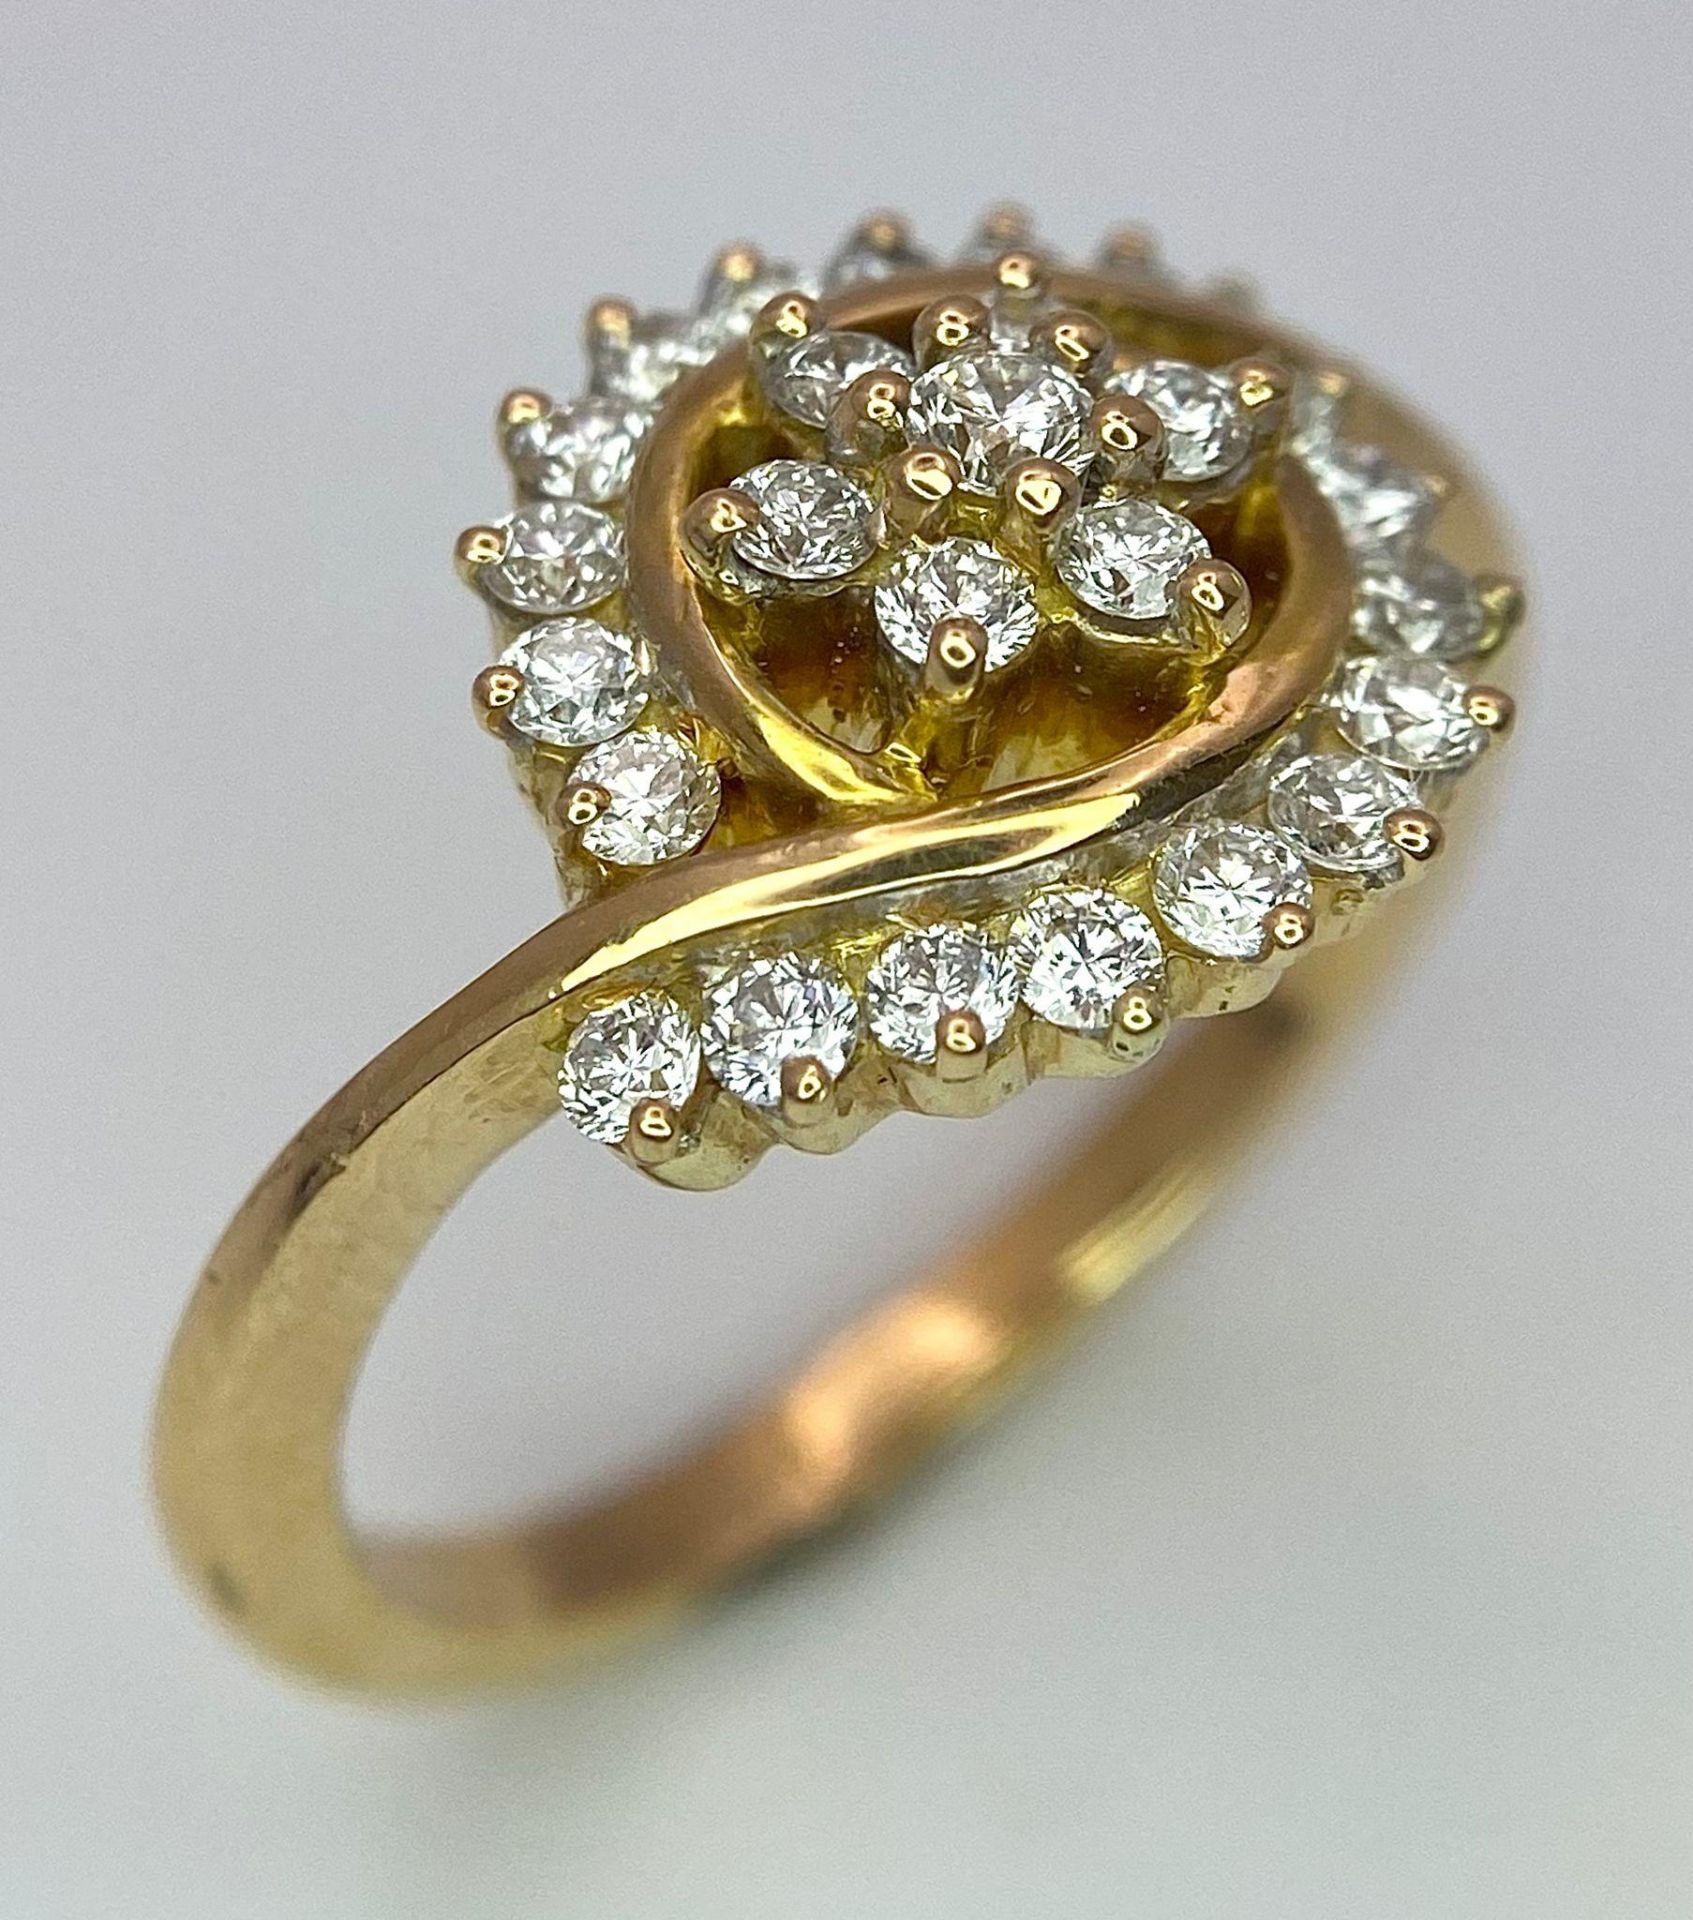 An attractive 14K Yellow Gold (tested as) Diamond Swirl Ring, 0.55ct diamond weight, 4.6g total - Image 2 of 6